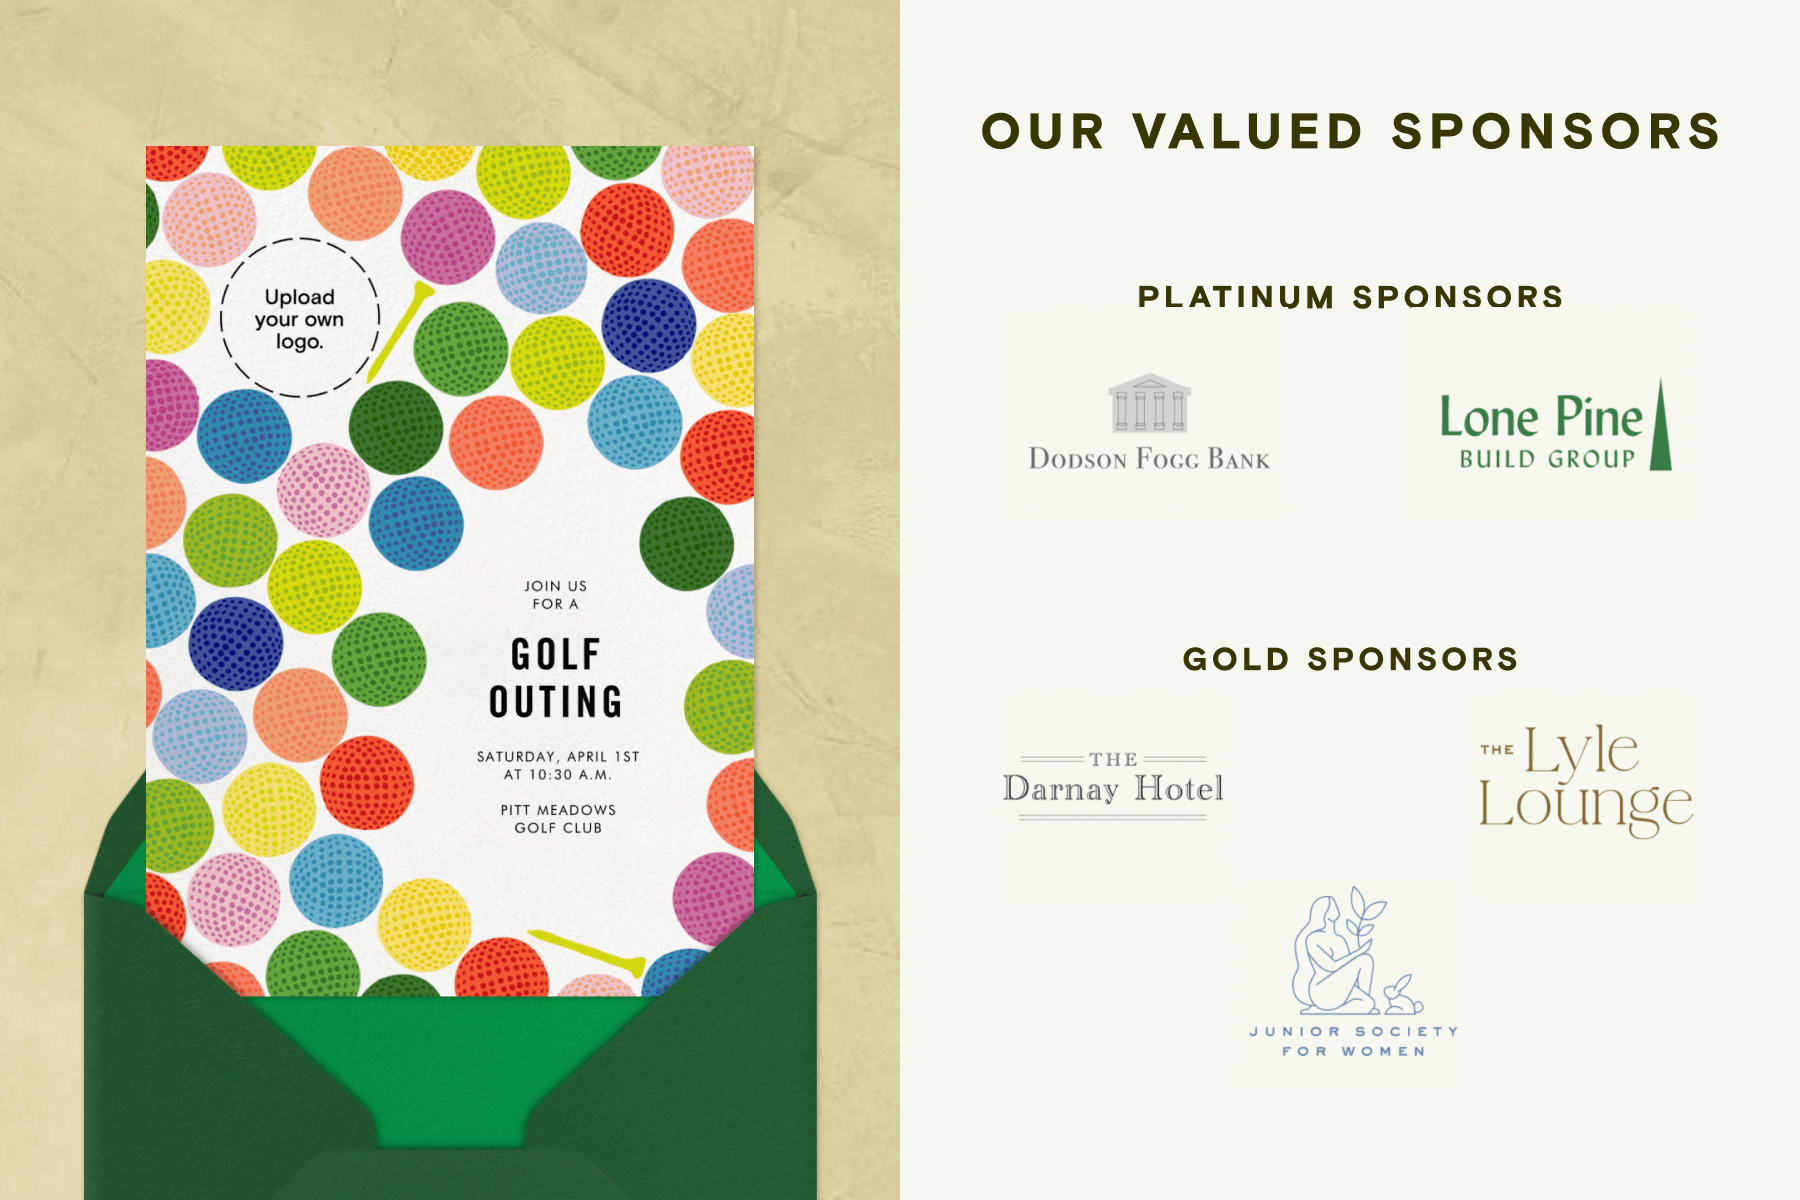 An invitation with colorful golf balls and a green envelope; the logos of several businesses with the title OUR VALUED SPONSORS.